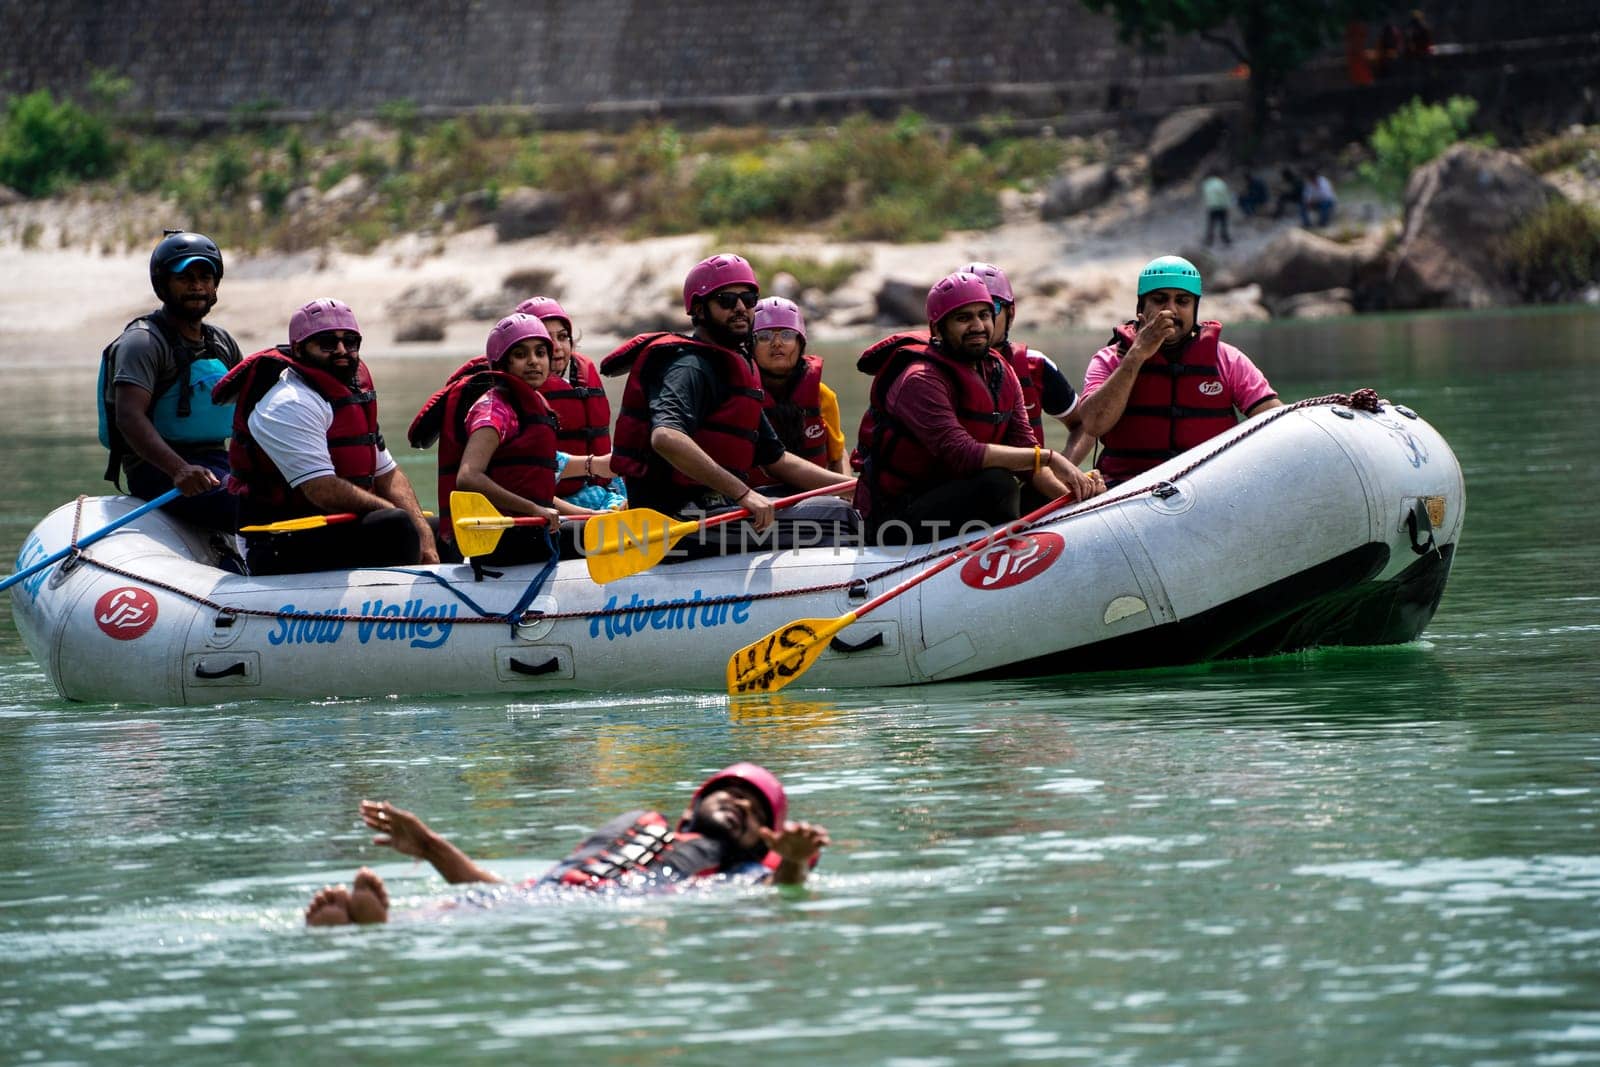 Rishikesh, Haridwar, India - circa 2023: group of people, friends, family floating in blue green cool water of ganga near an inflatable raft and being pulled into it a popular adventure sport